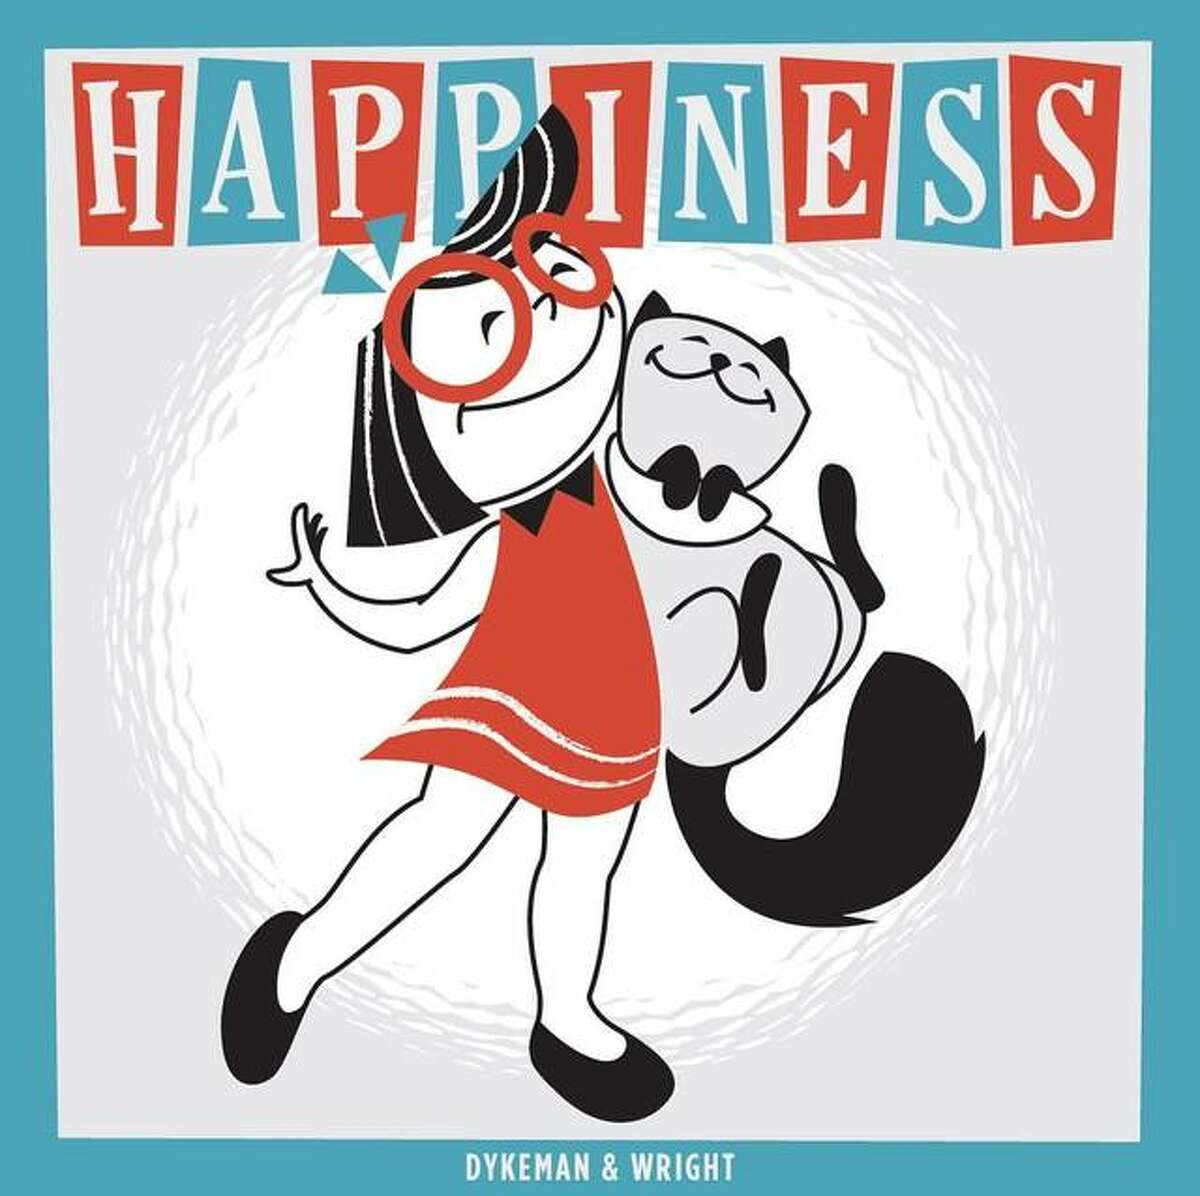 The cover of “Happiness” written by Dr. Dykeman with illustrations by Kris Wright.